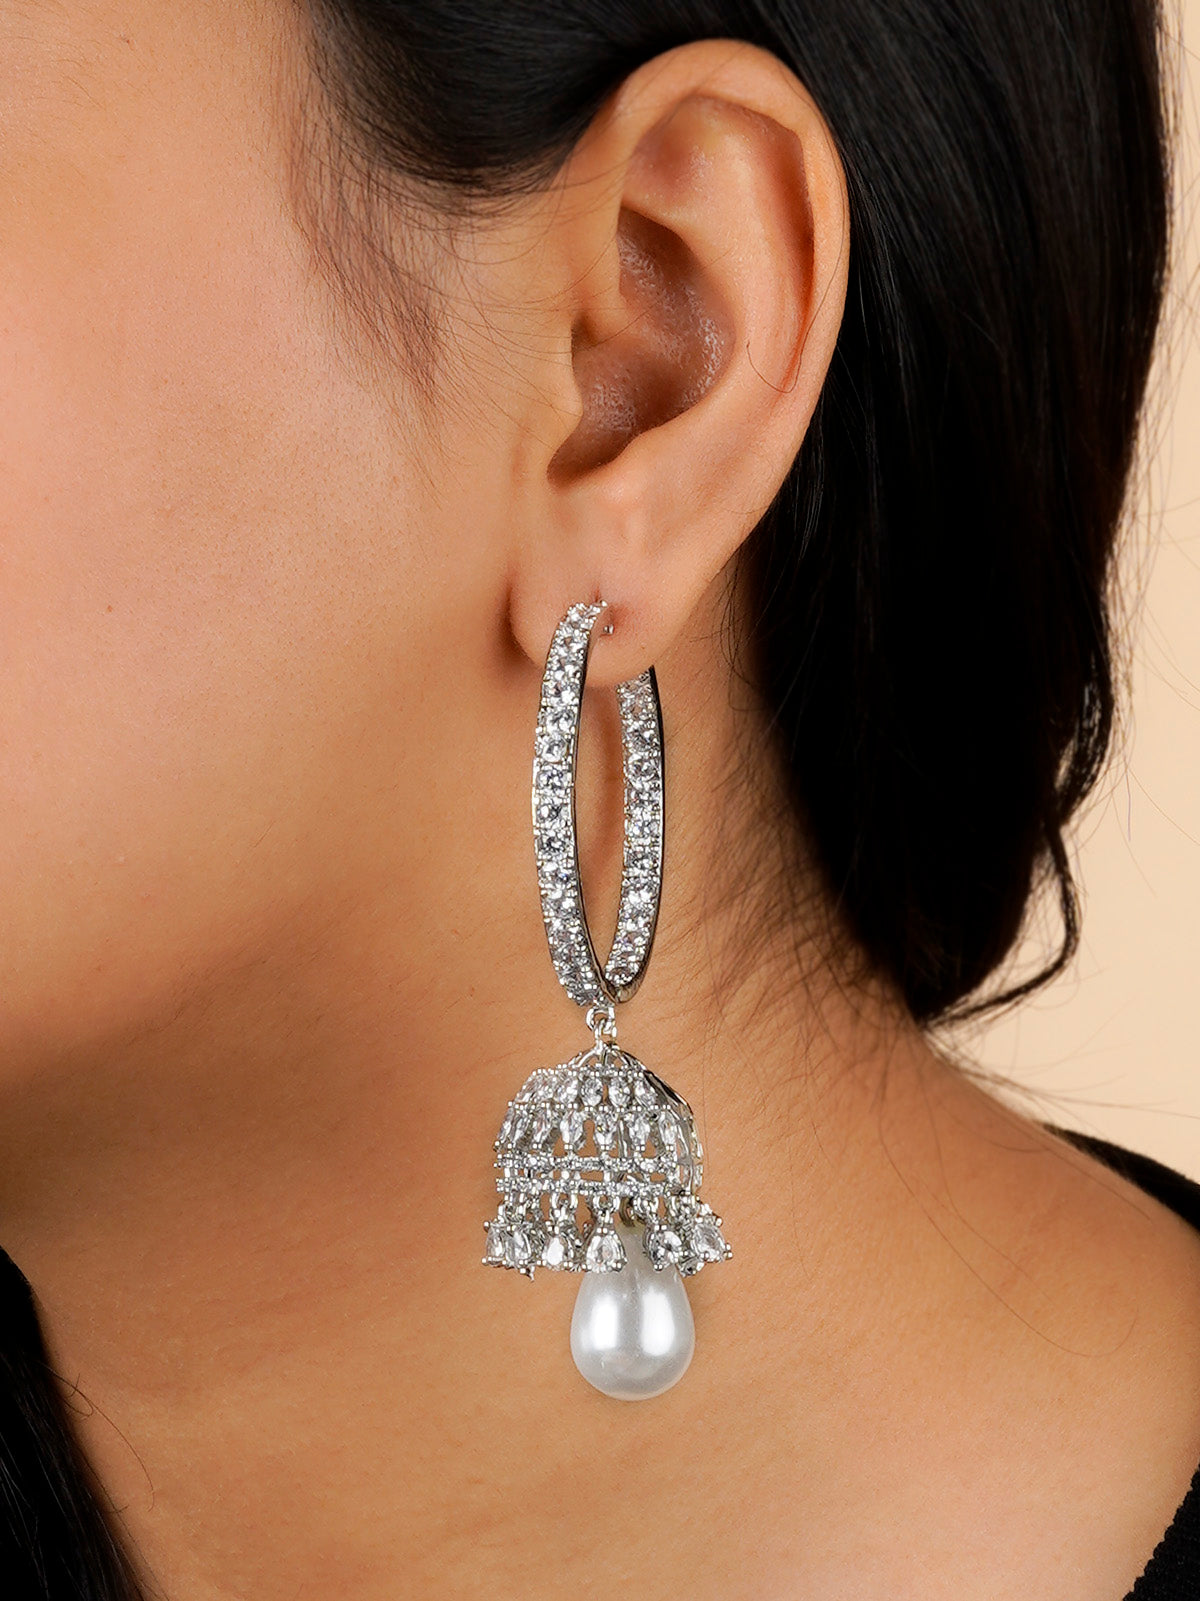 CZEAR522 - White Color Silver Plated Faux Diamond Earrings